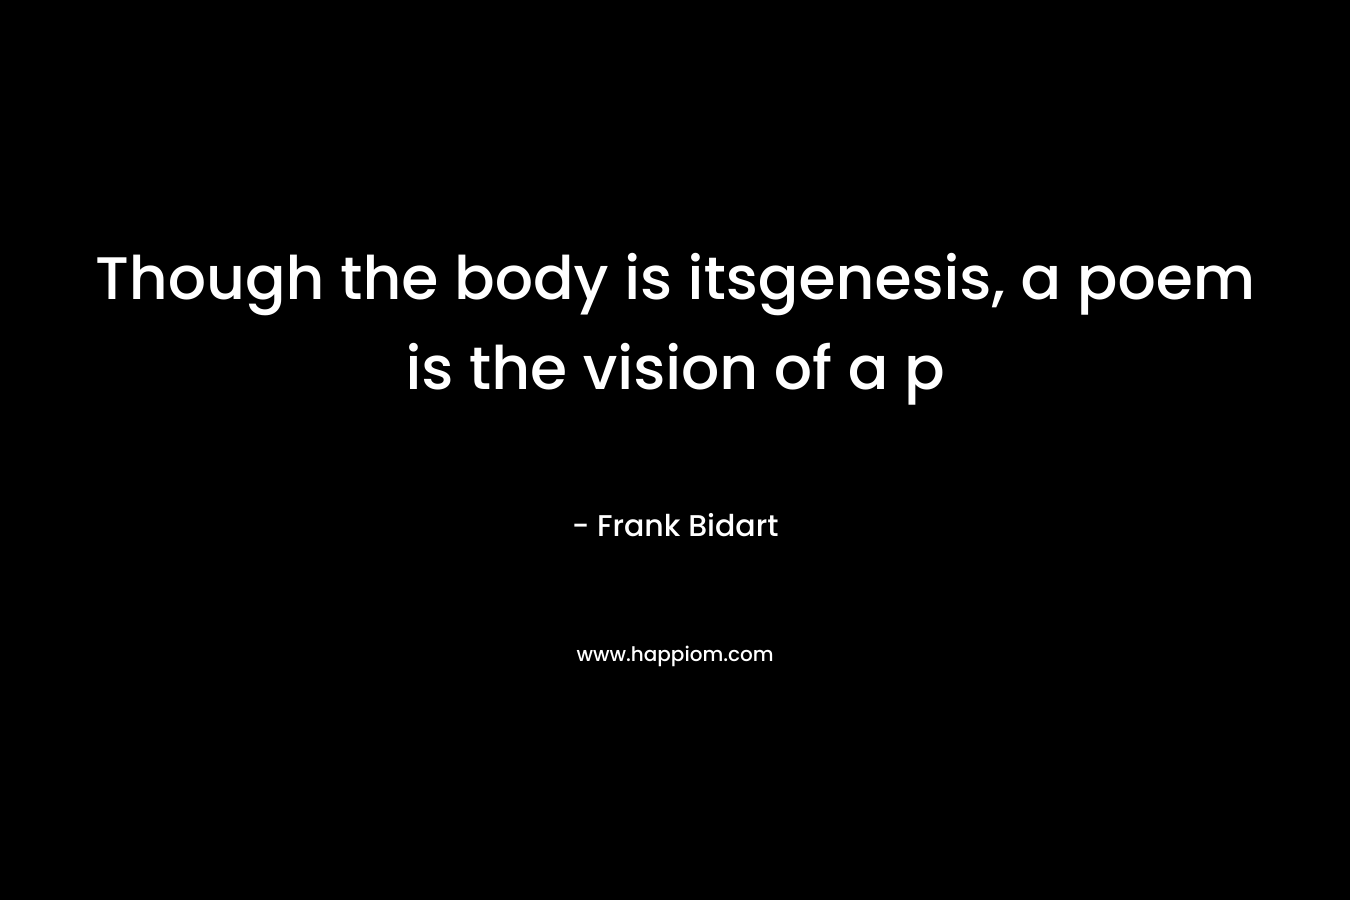 Though the body is itsgenesis, a poem is the vision of a p – Frank Bidart